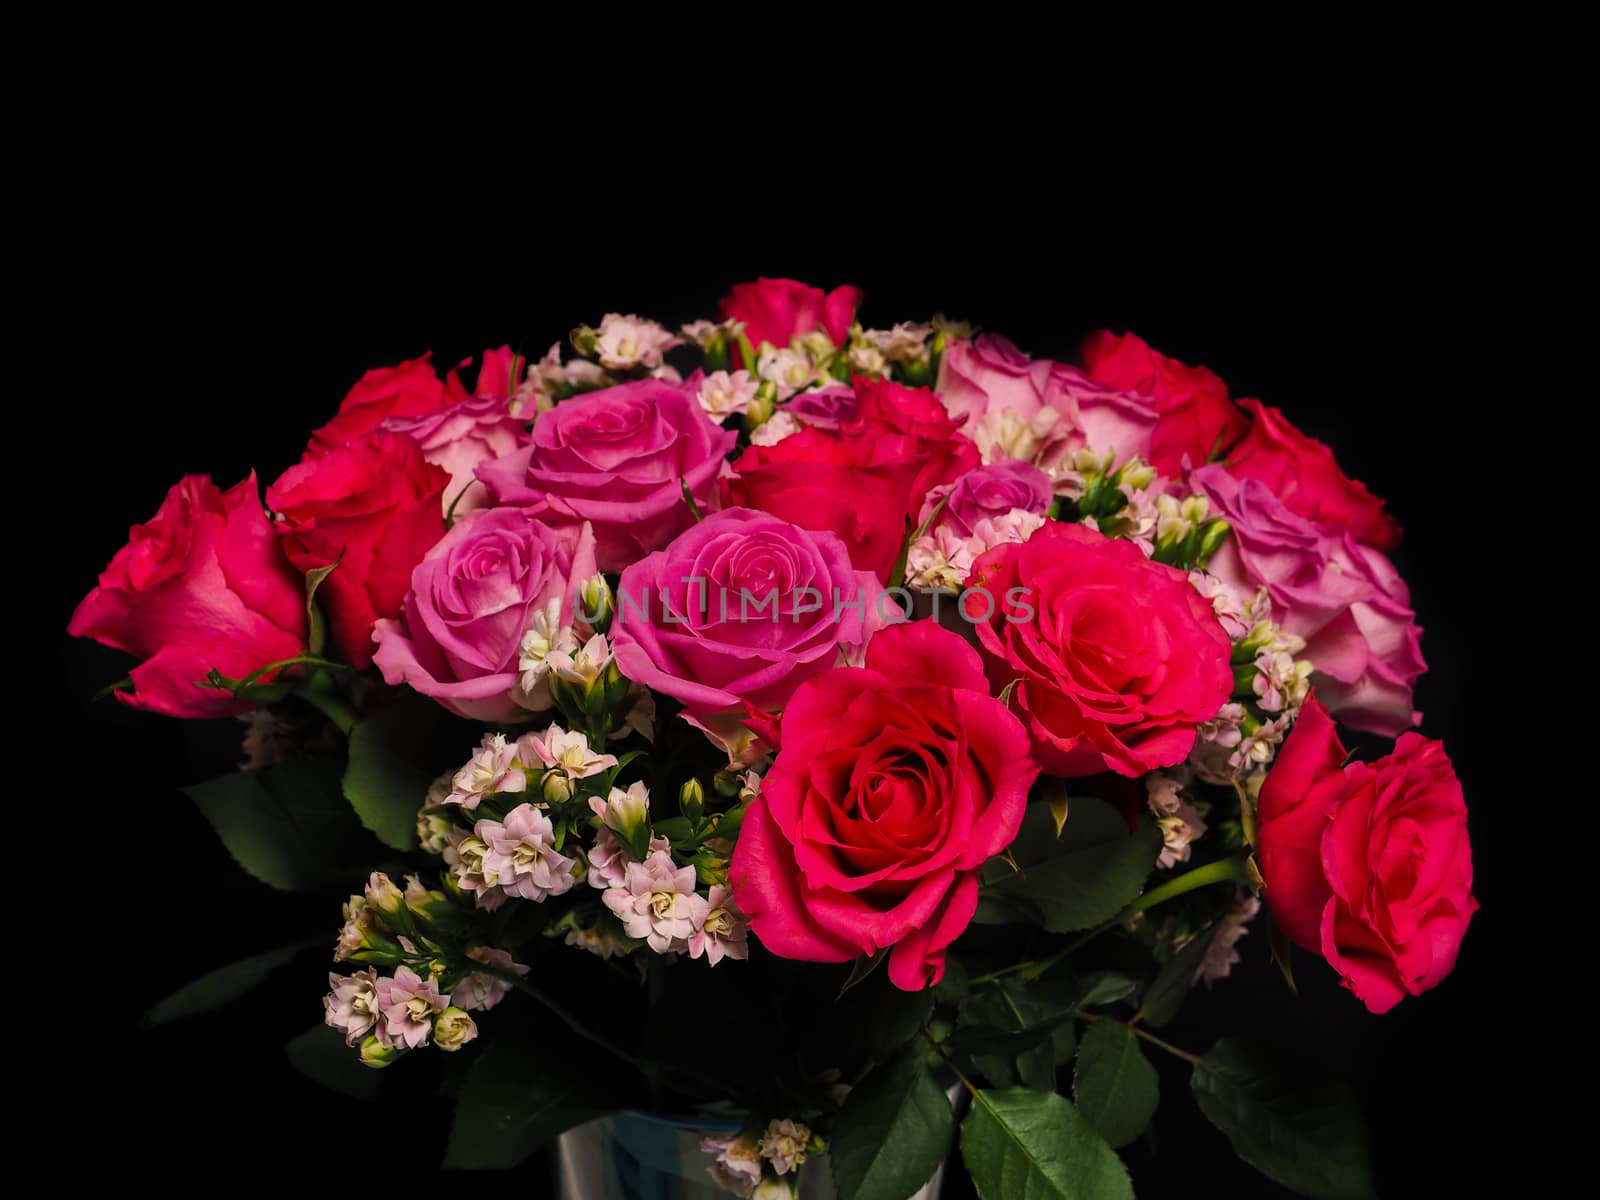 Bouquet of pink roses at closeup towards black background